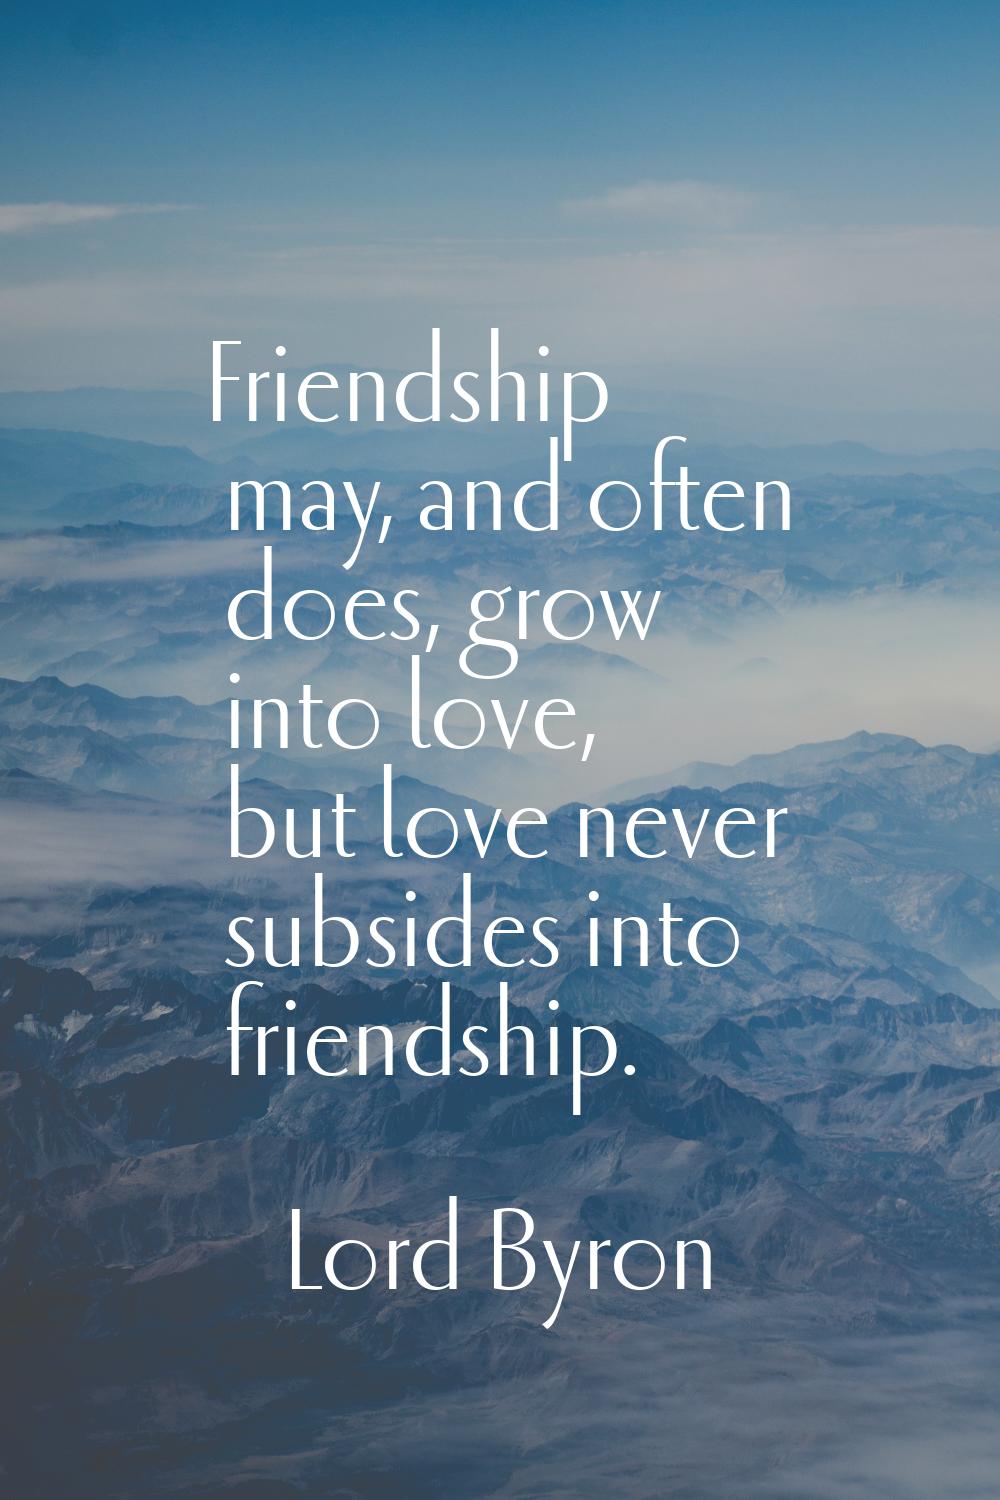 Friendship may, and often does, grow into love, but love never subsides into friendship.